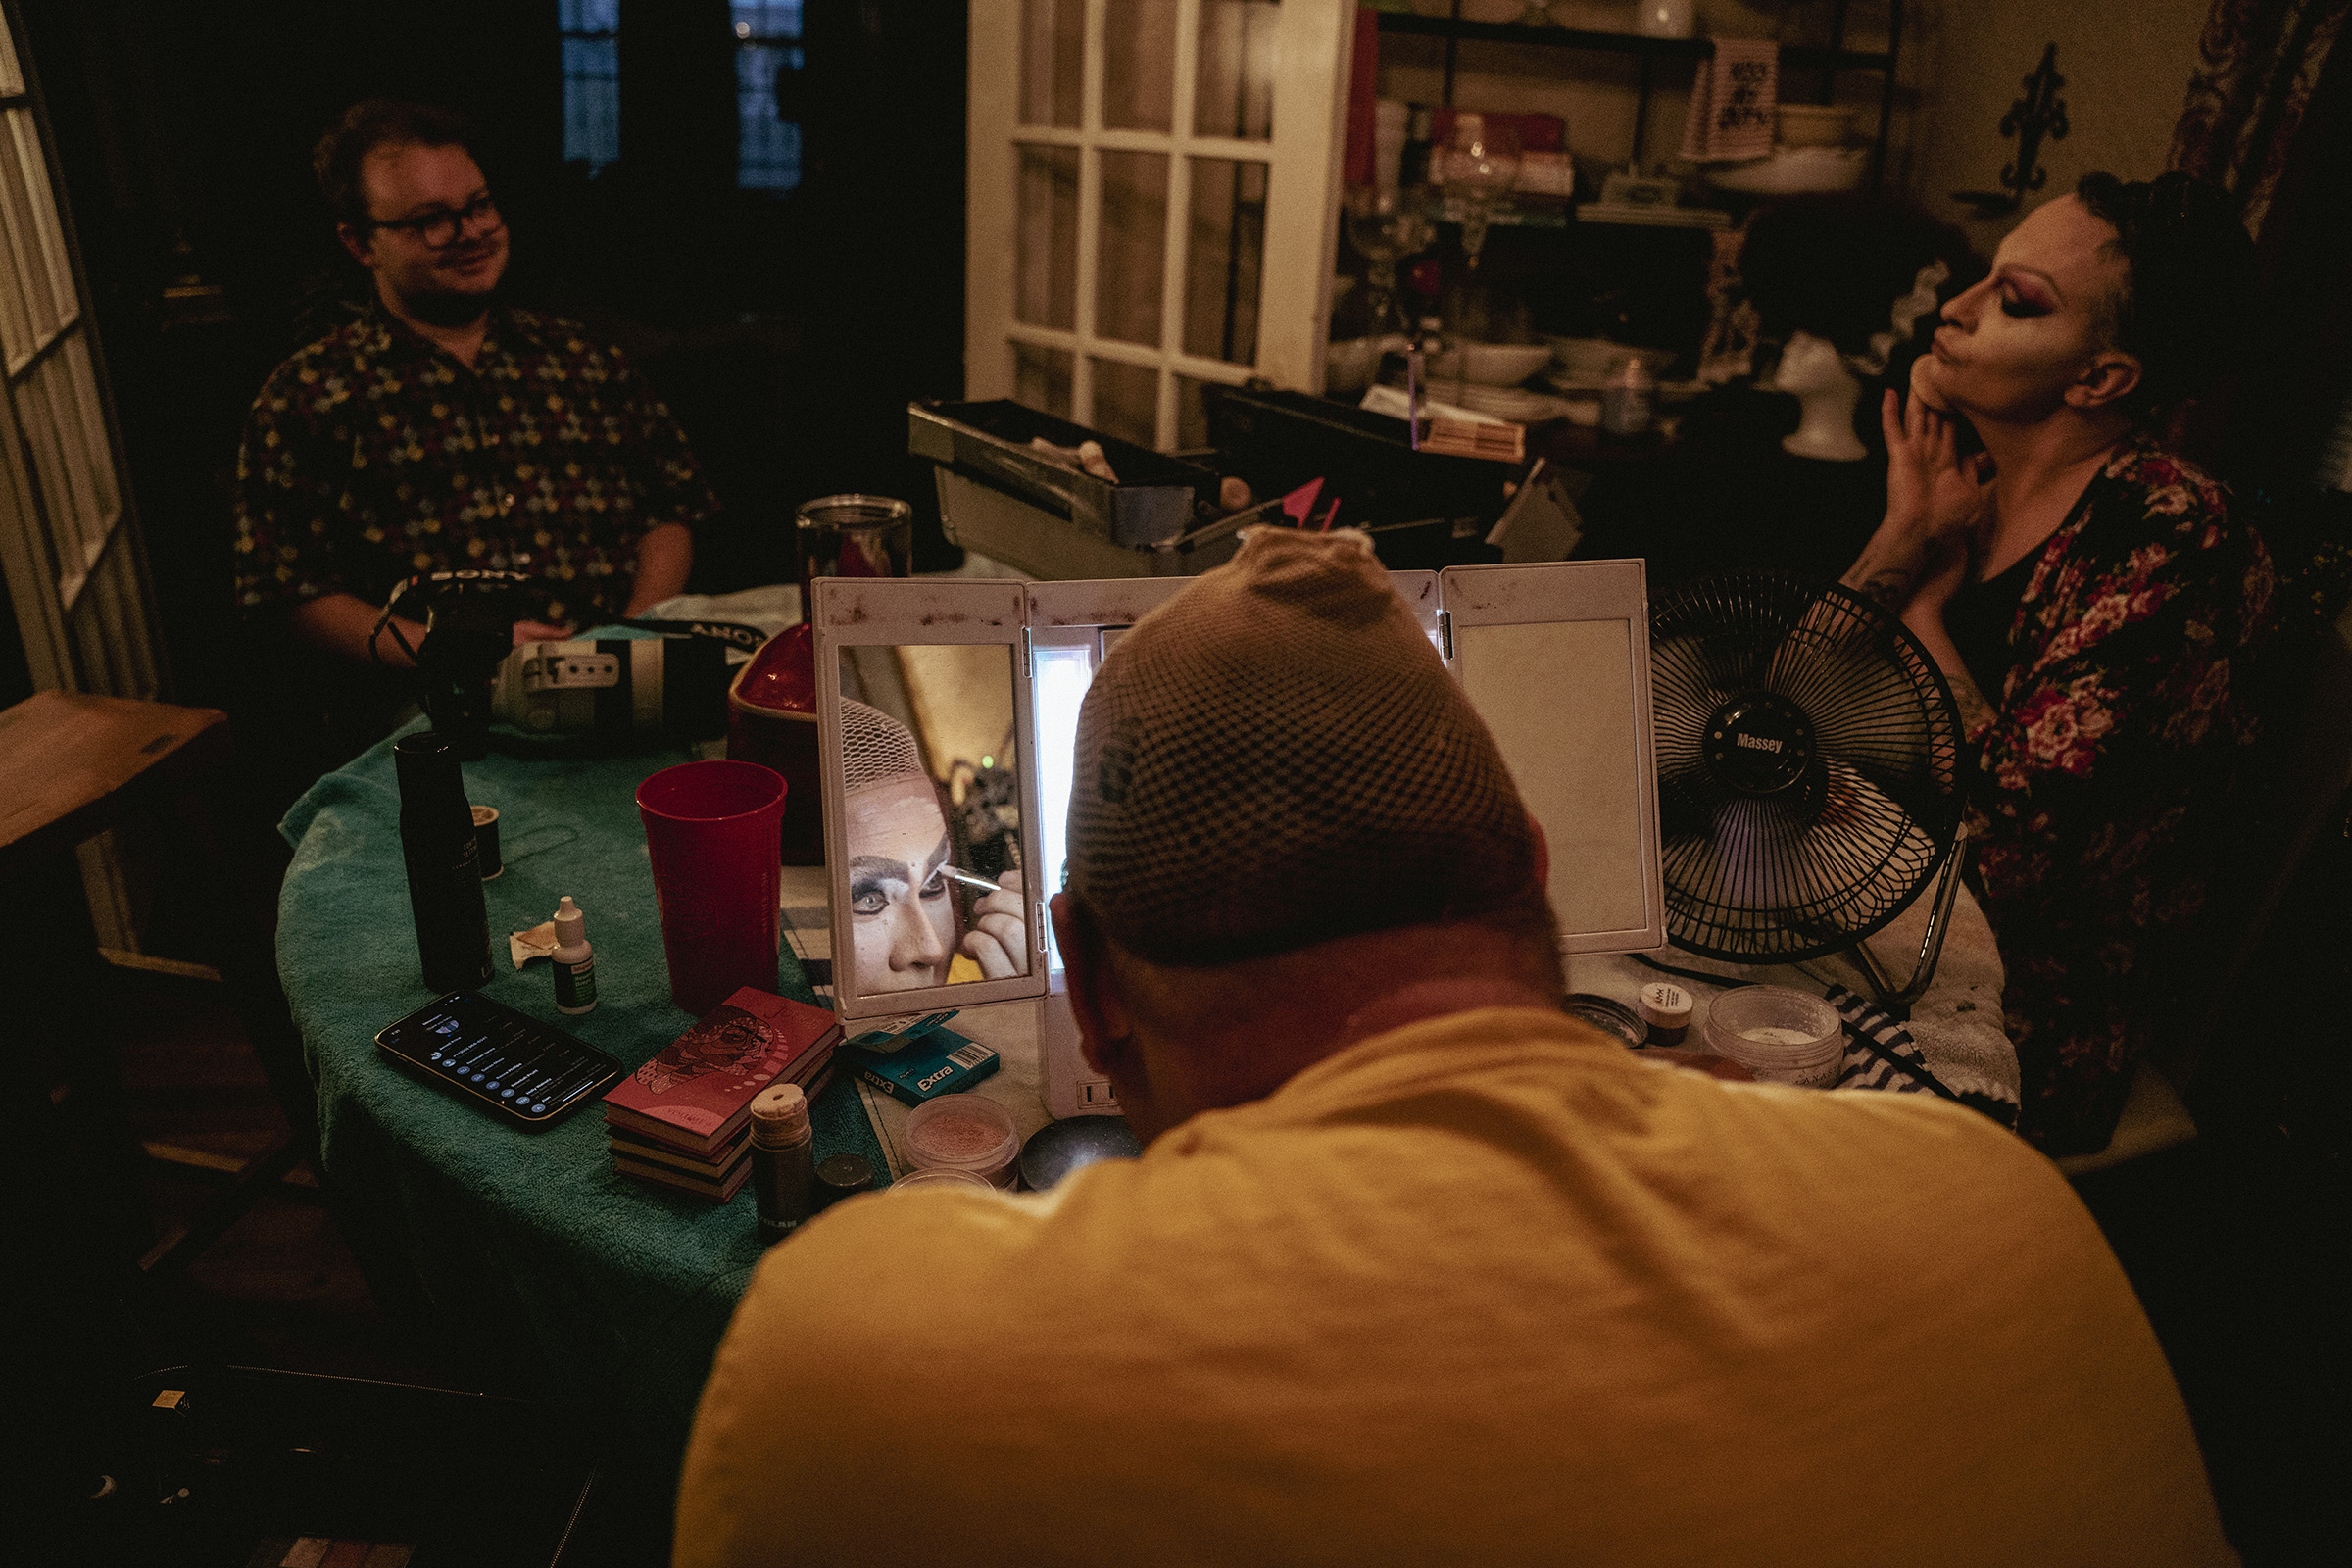 Kelly McDaniel begins his transformation into his drag-queen persona, Keleigh Klarke, at home along with fellow performer Holly Walnutz (right) and Klarke’s drag daughter Stephanie Embark (left). (Andrea Morales for TIME)